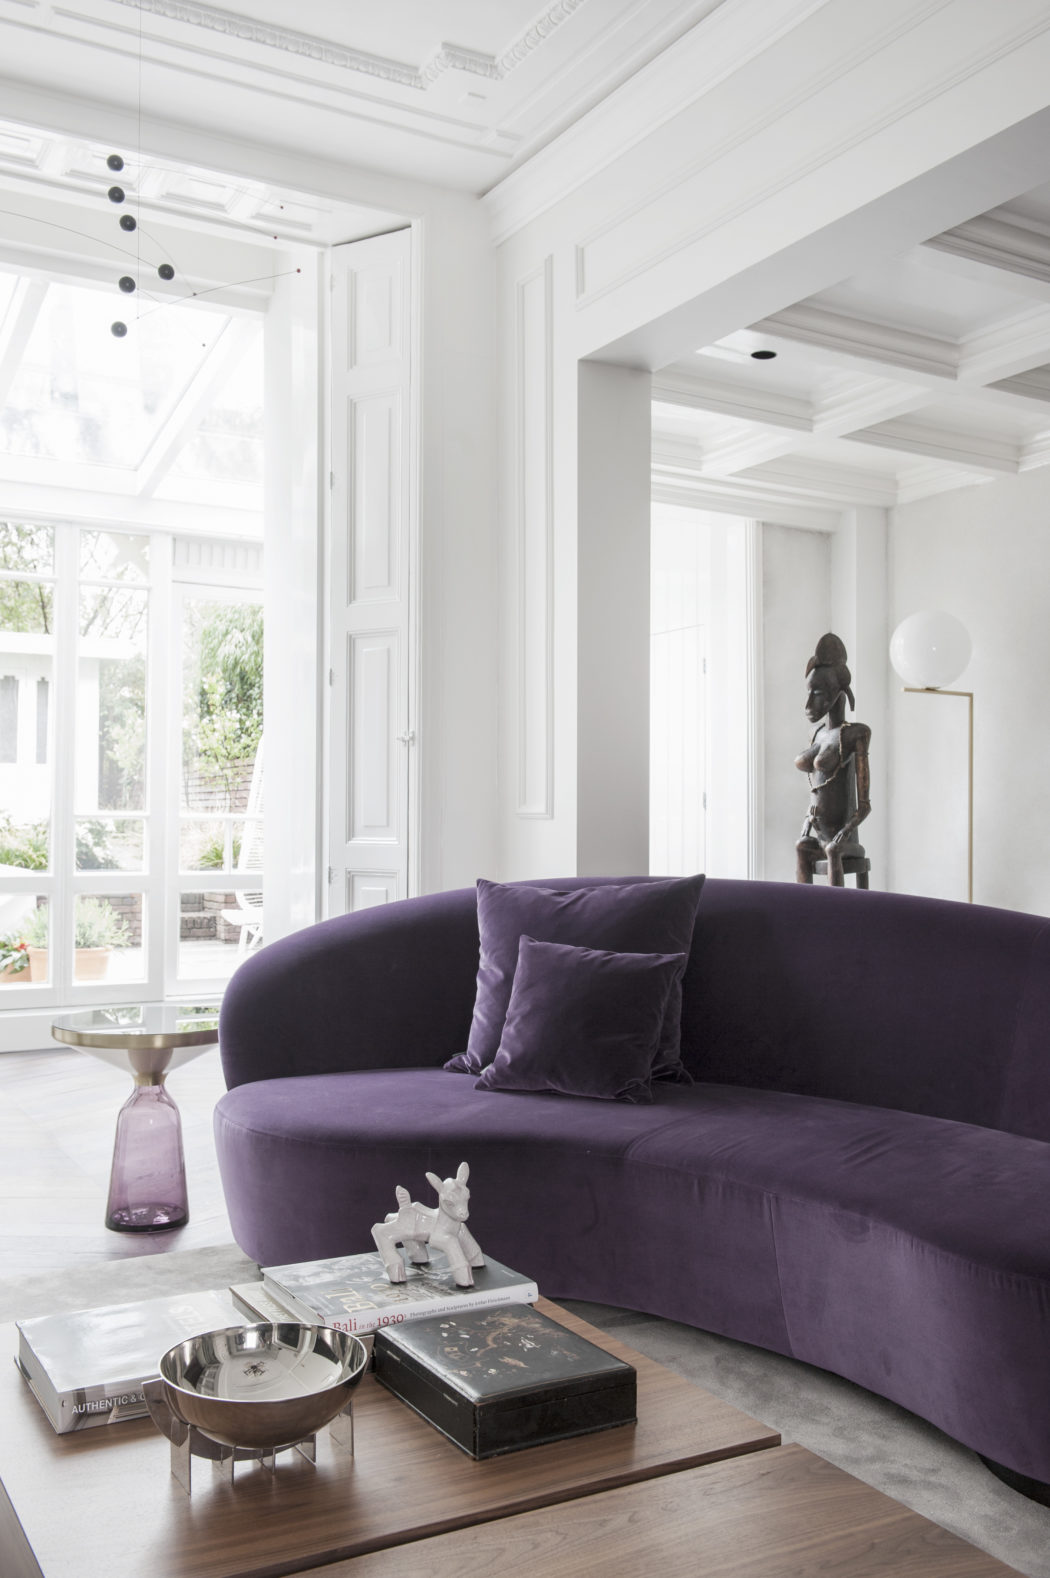 Bright, modern interior featuring a plush purple couch, ornate decor, and large windows.